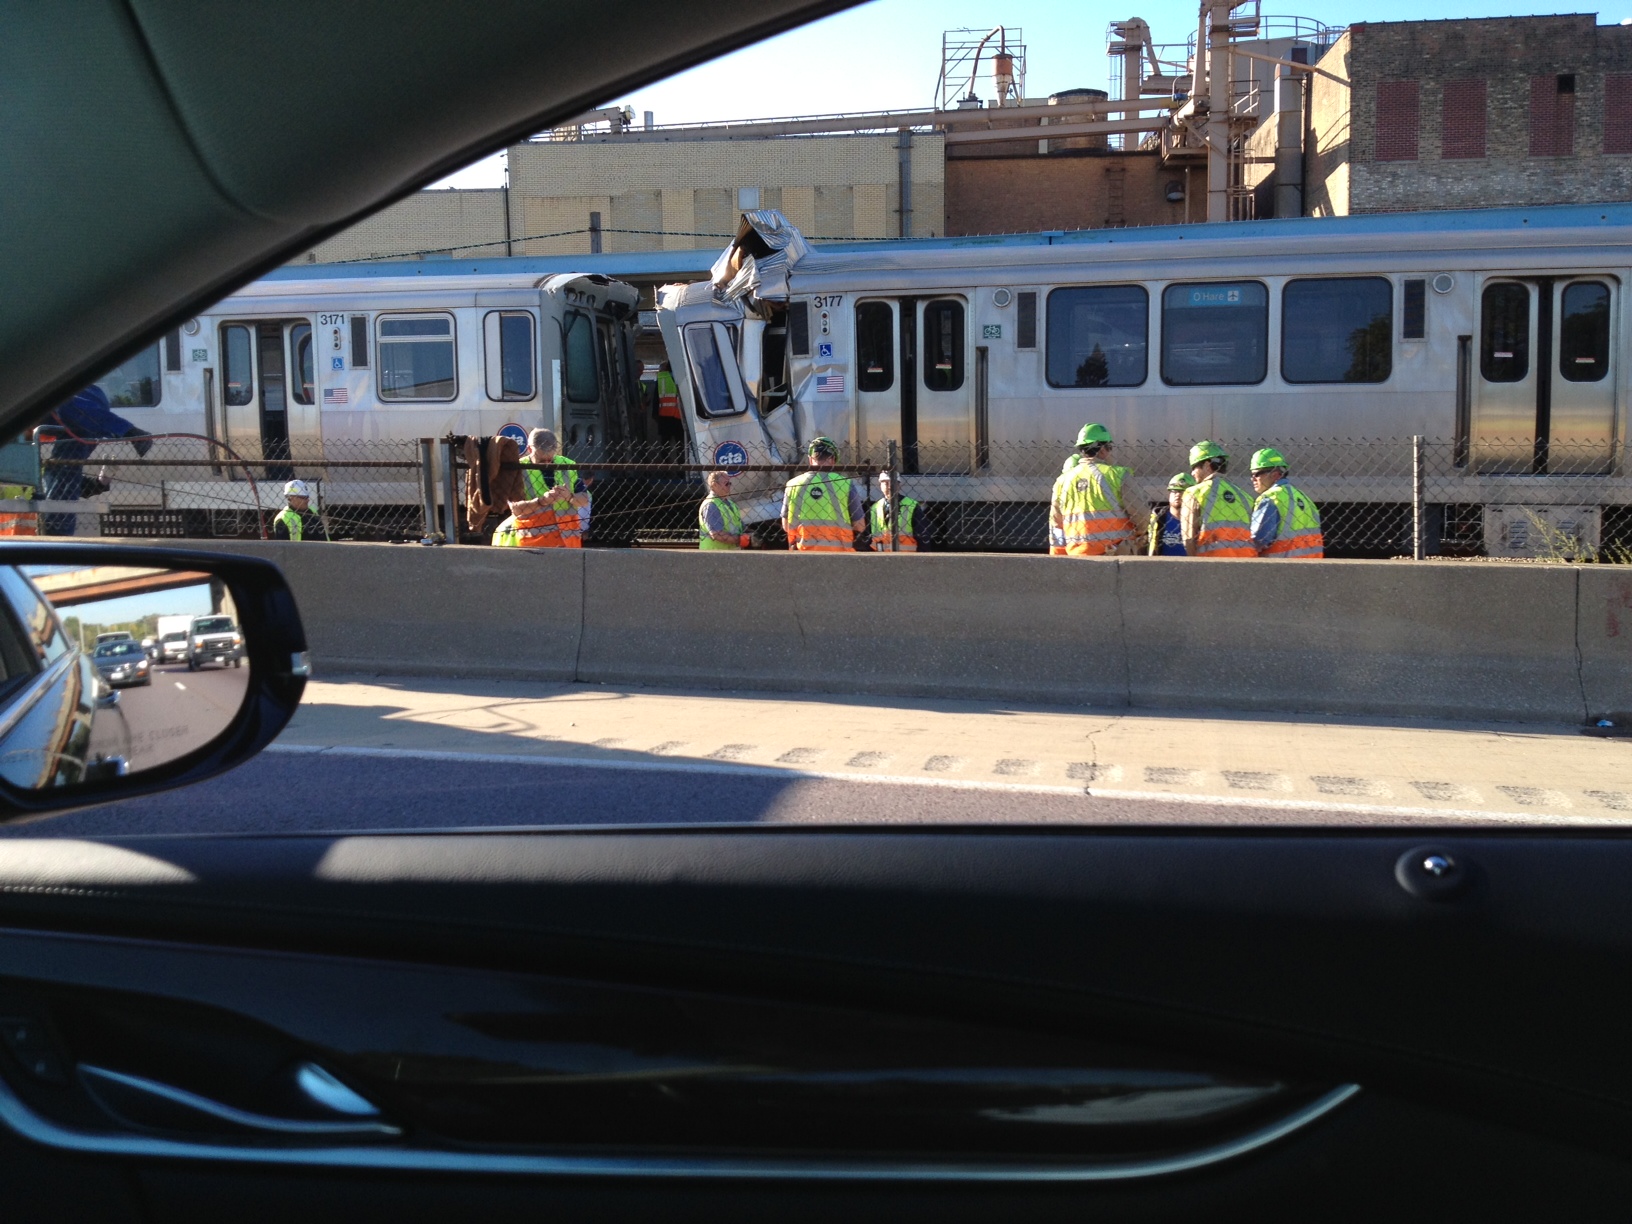 CTA workers respond to an accident on the Blue Line on Monday. (Credit: Michael Biemolt)